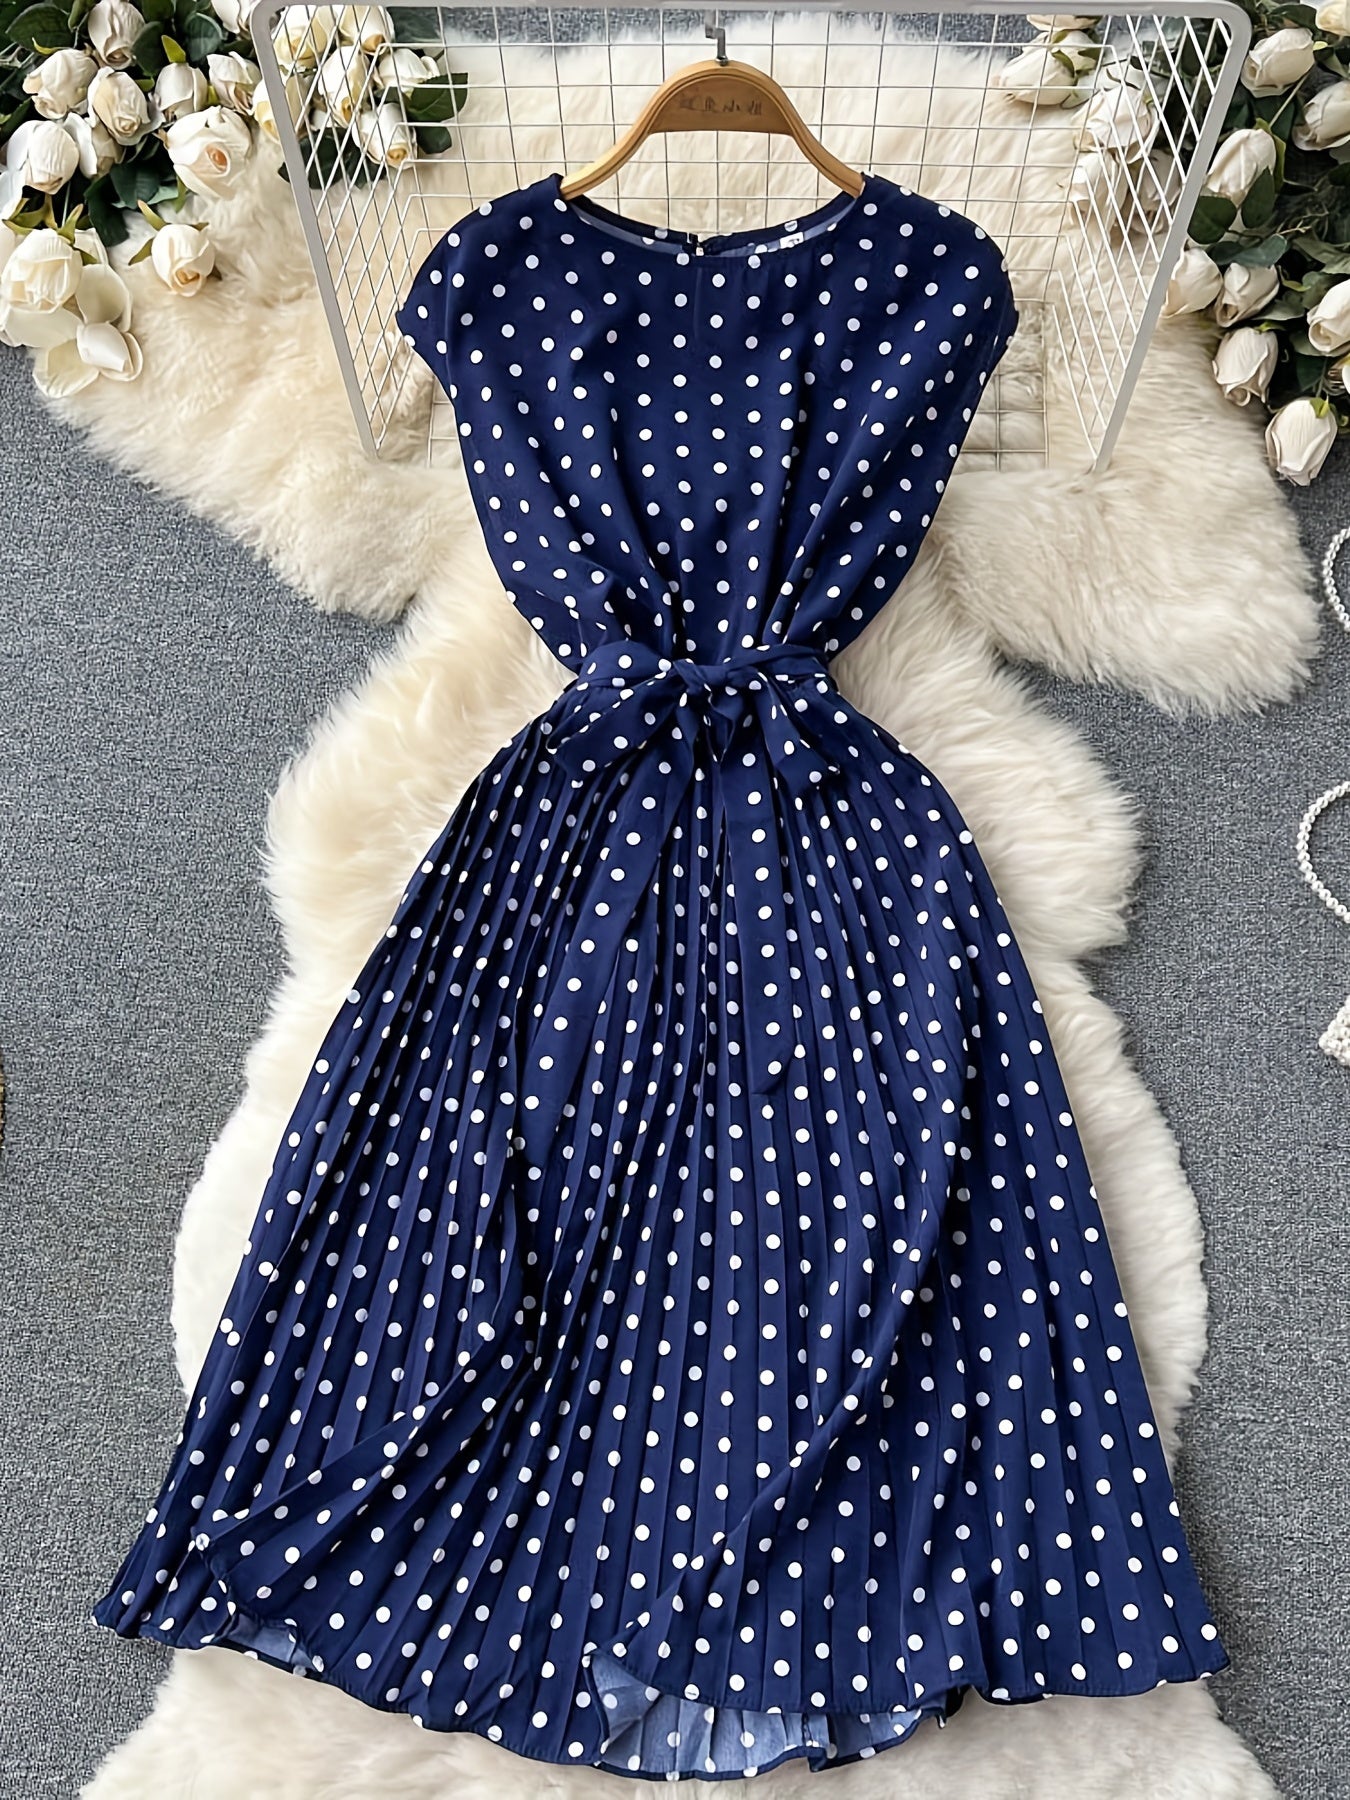 hoombox Polka Dot Pleated Dress, Short Sleeve Casual Dress For Spring & Summer, Women's Clothing